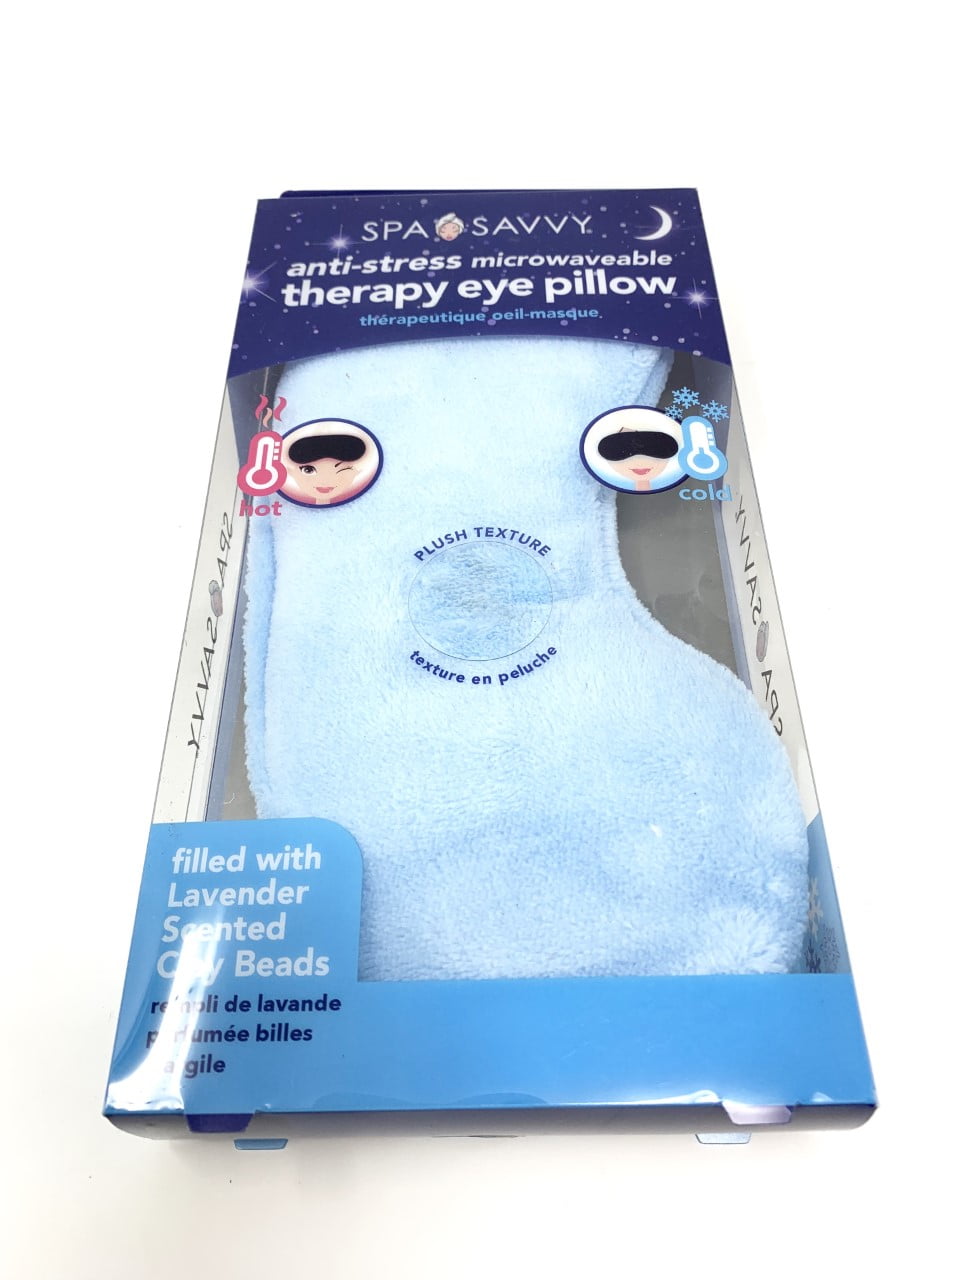 Idan Med Spa Lavender Eye Pillow Relaxation Sleeping Washable Comfortable Over The Head Blue and Gray. Hot and Cold Therapy for Yoga 